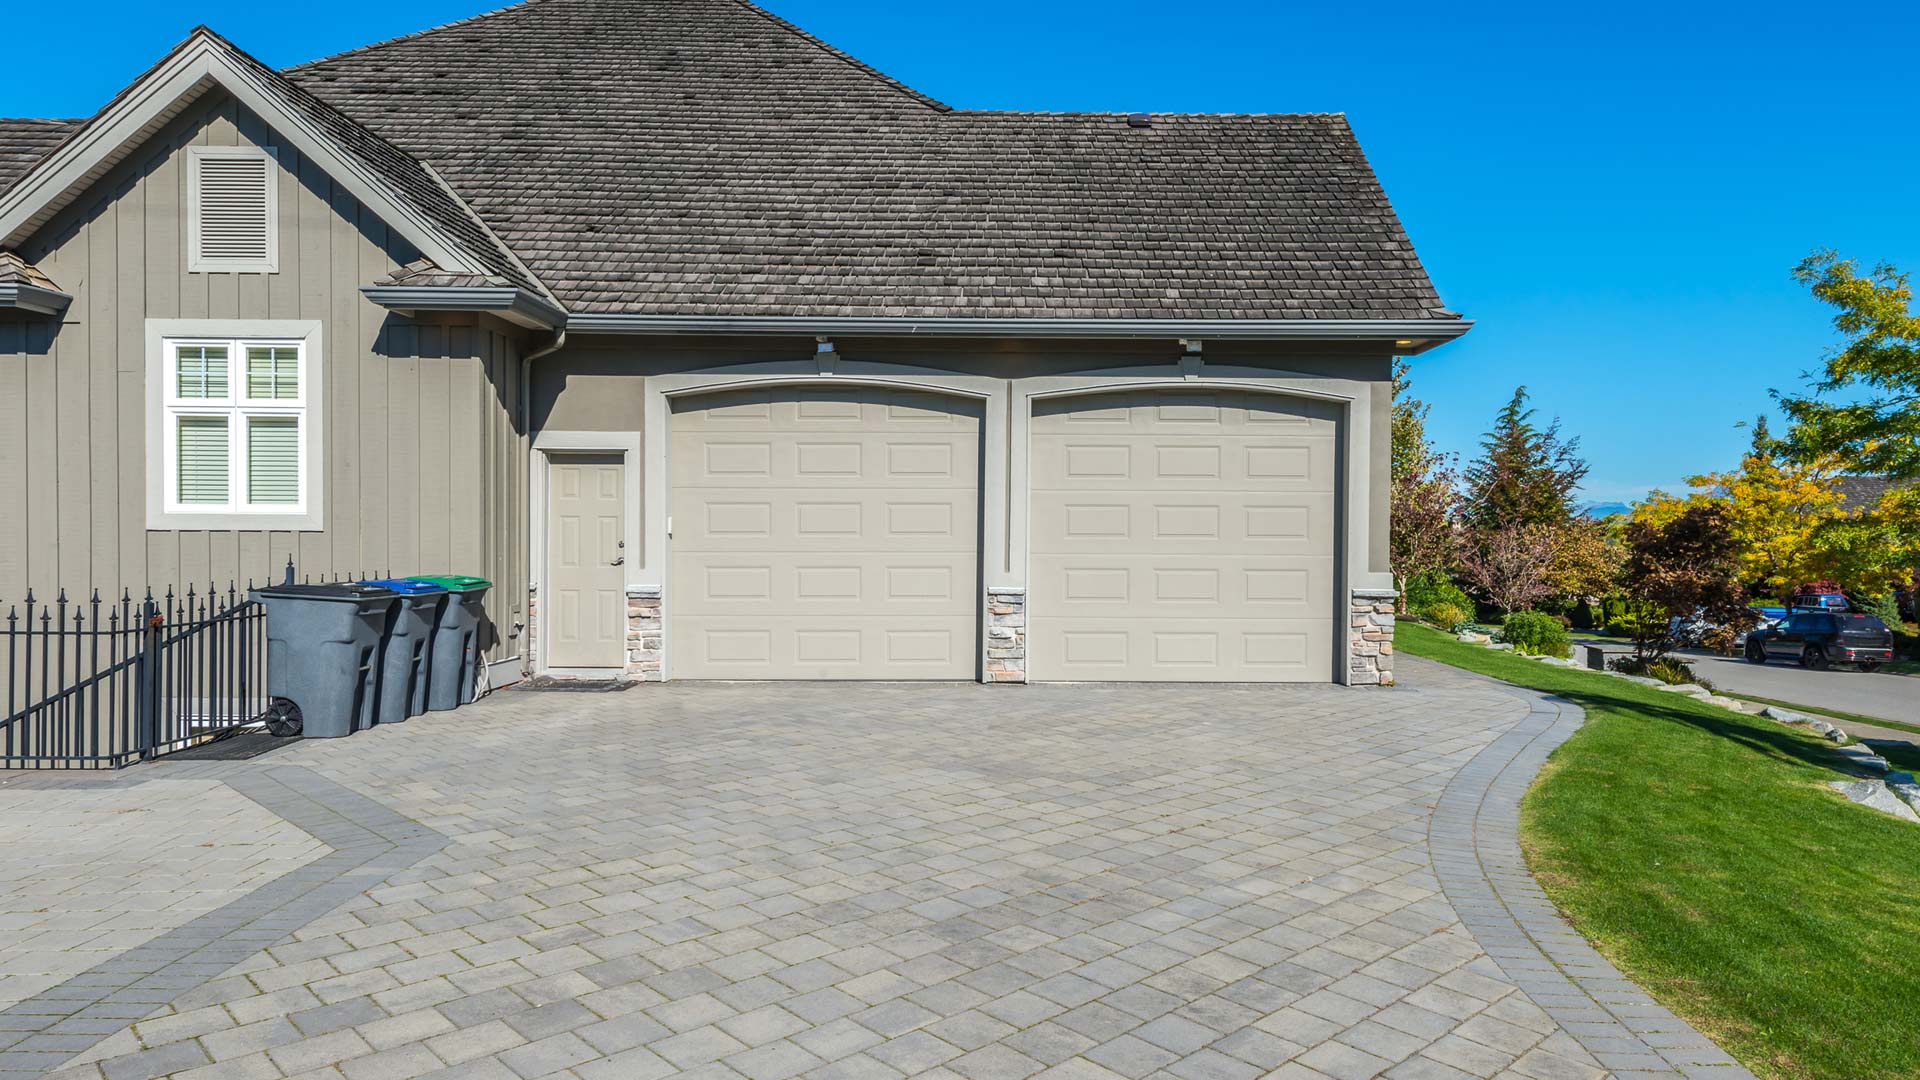 Durable pavers installed for a home's driveway in Scottsdale, AZ.